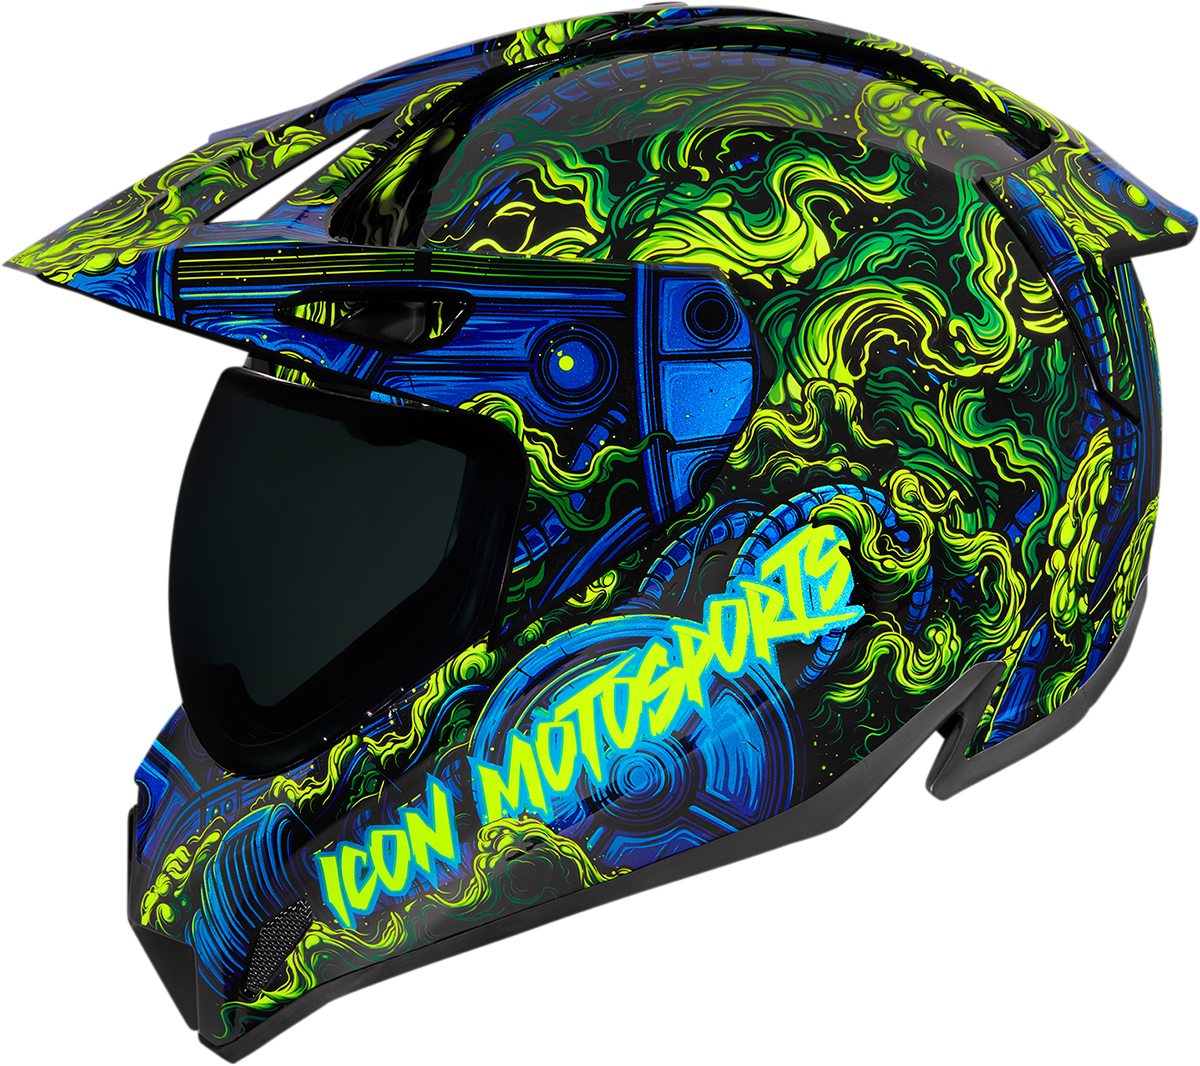 ICON Variant Pro™ Helmet - Willy Pete - Large 0101-13388